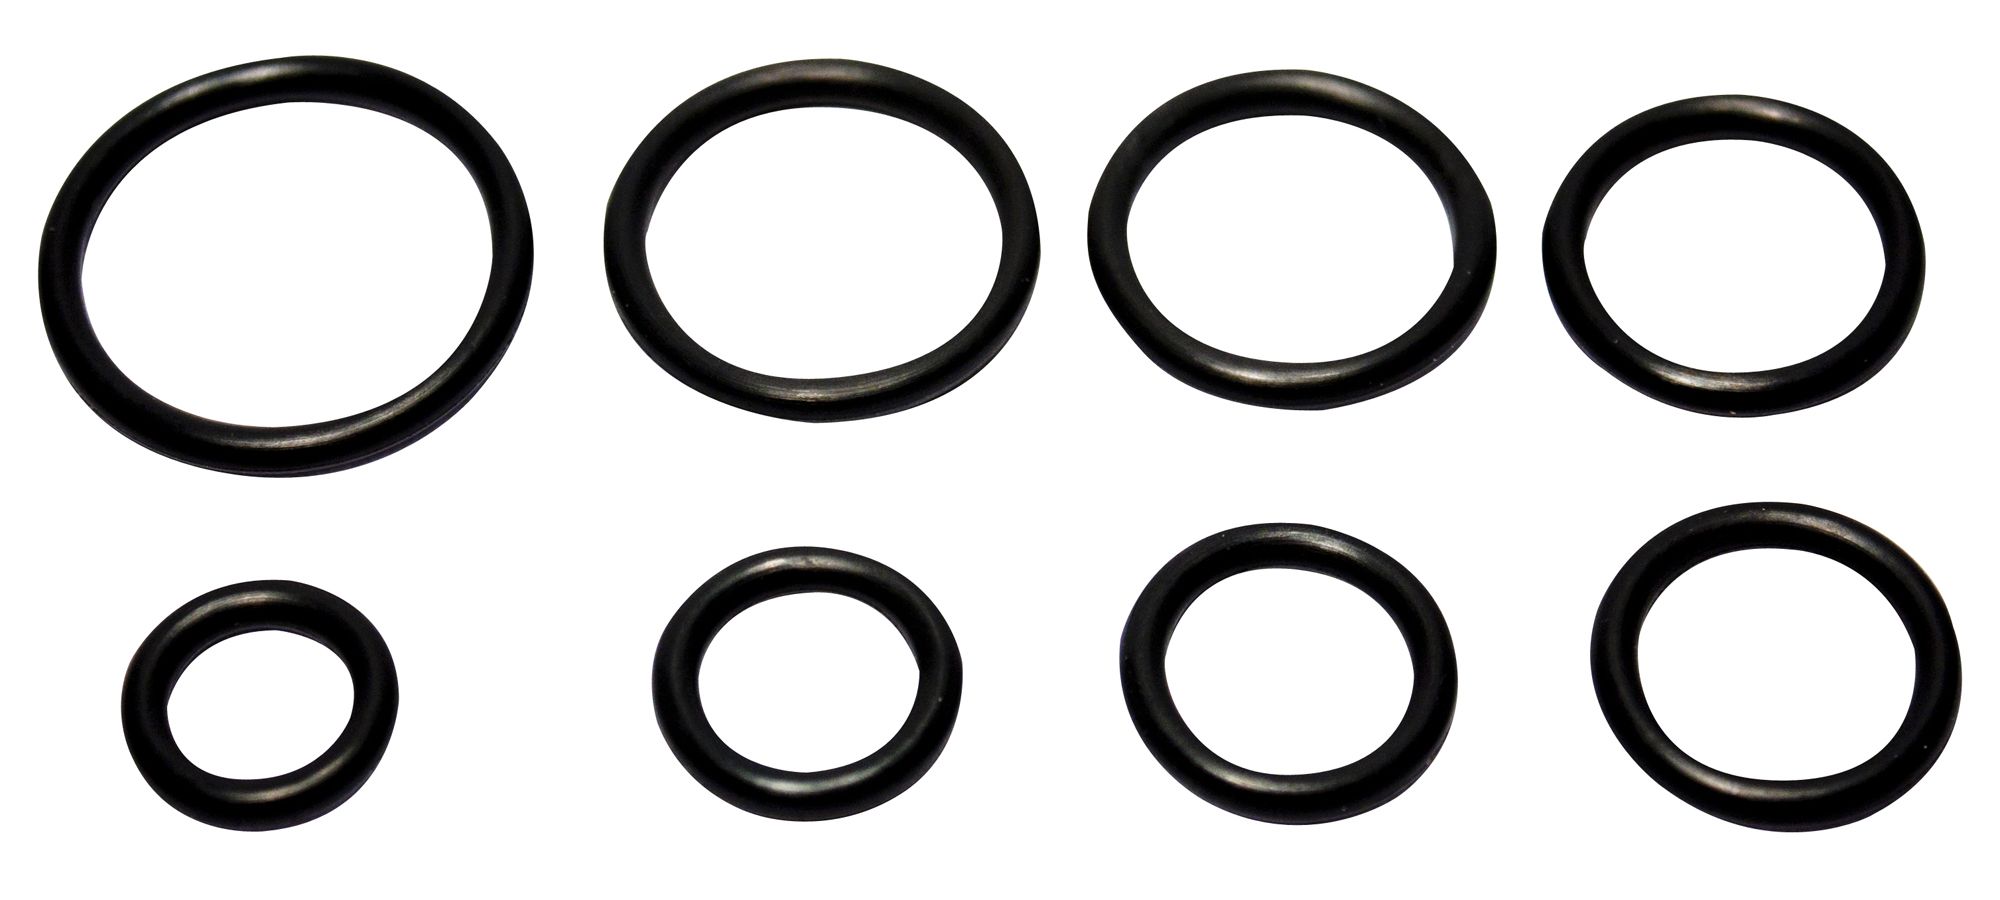 Plumbsure Rubber O ring, Pack of 8